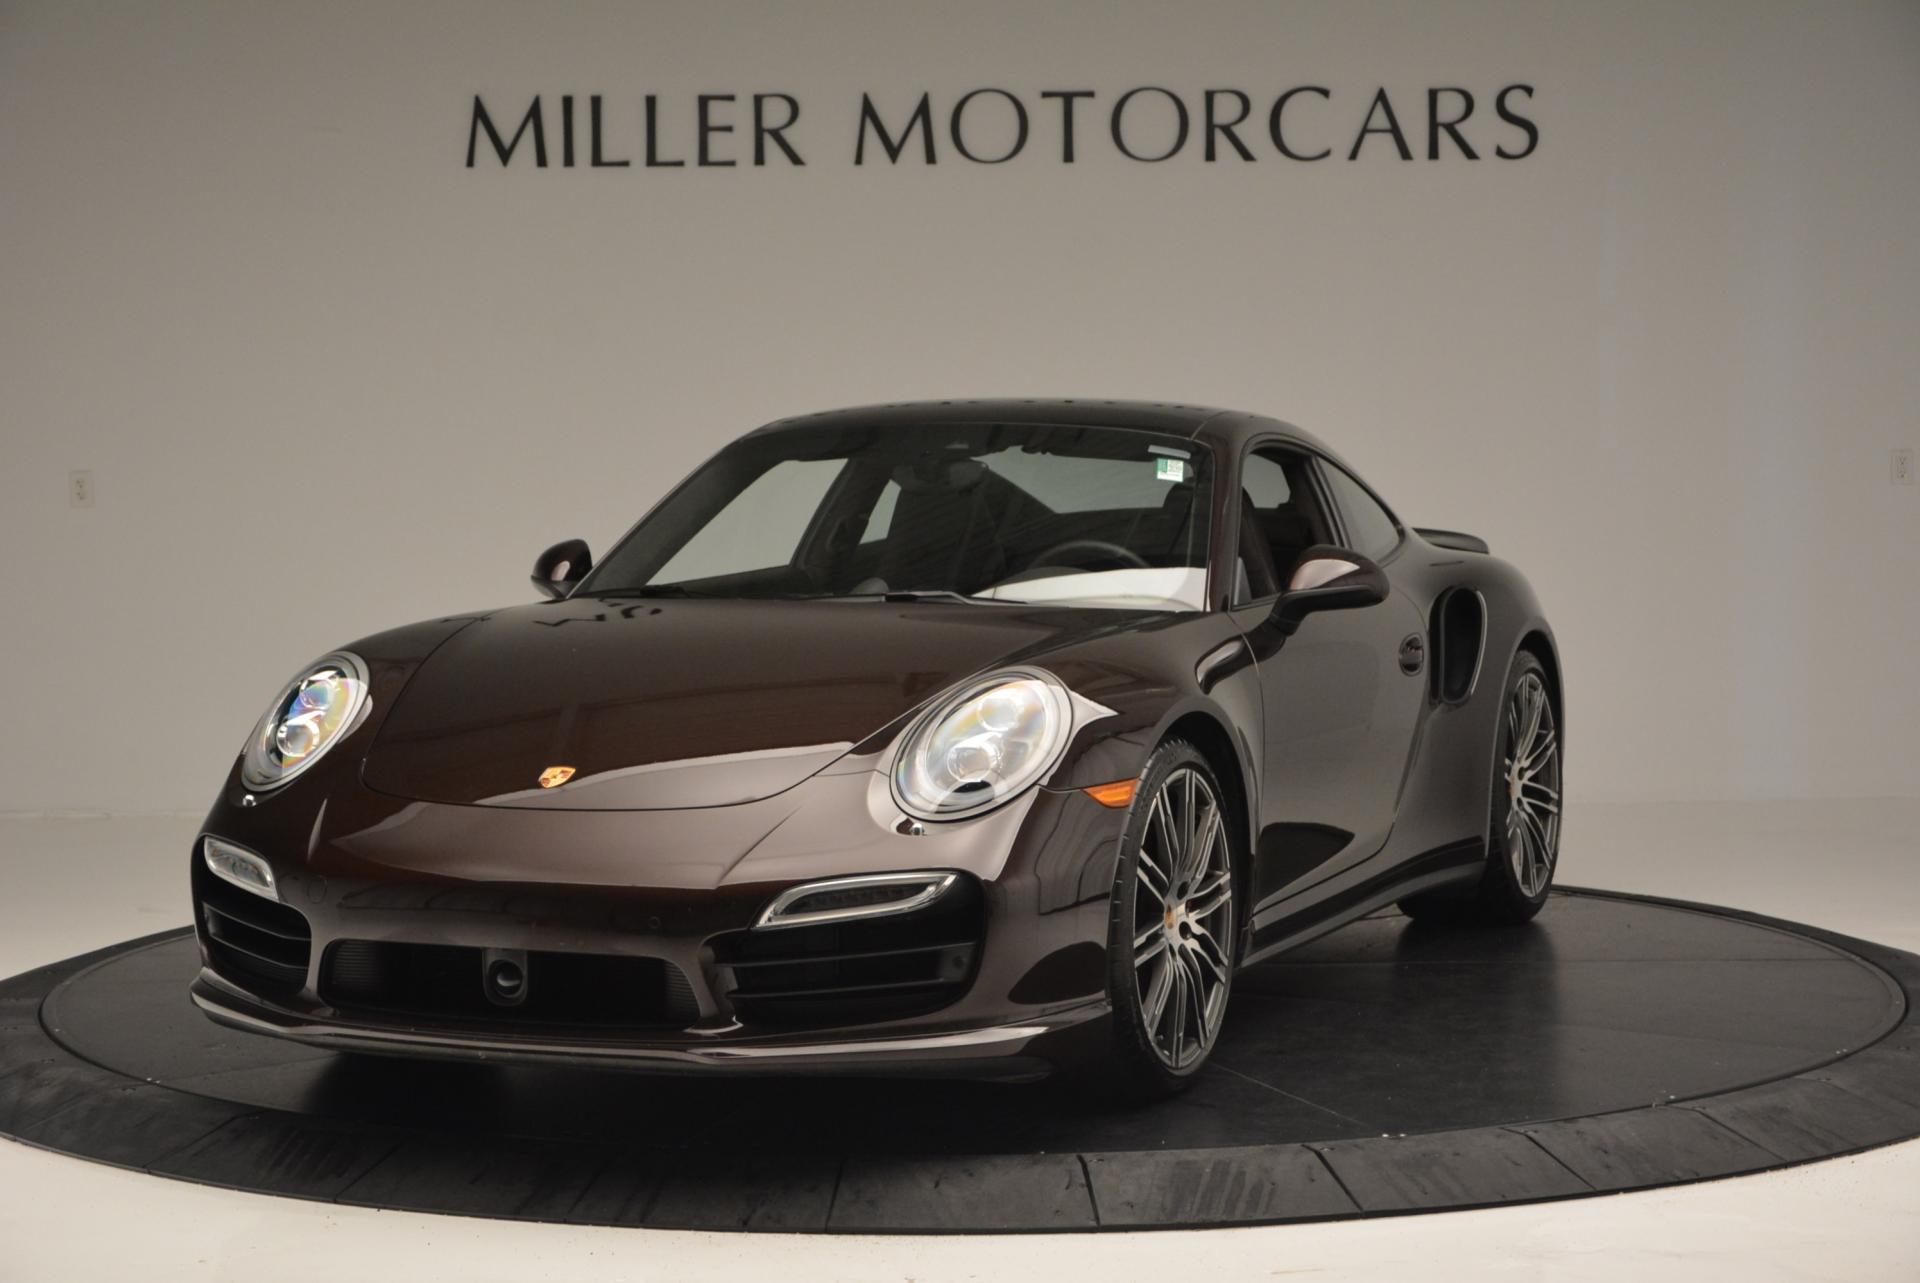 Used 2014 Porsche 911 Turbo for sale Sold at Maserati of Westport in Westport CT 06880 1